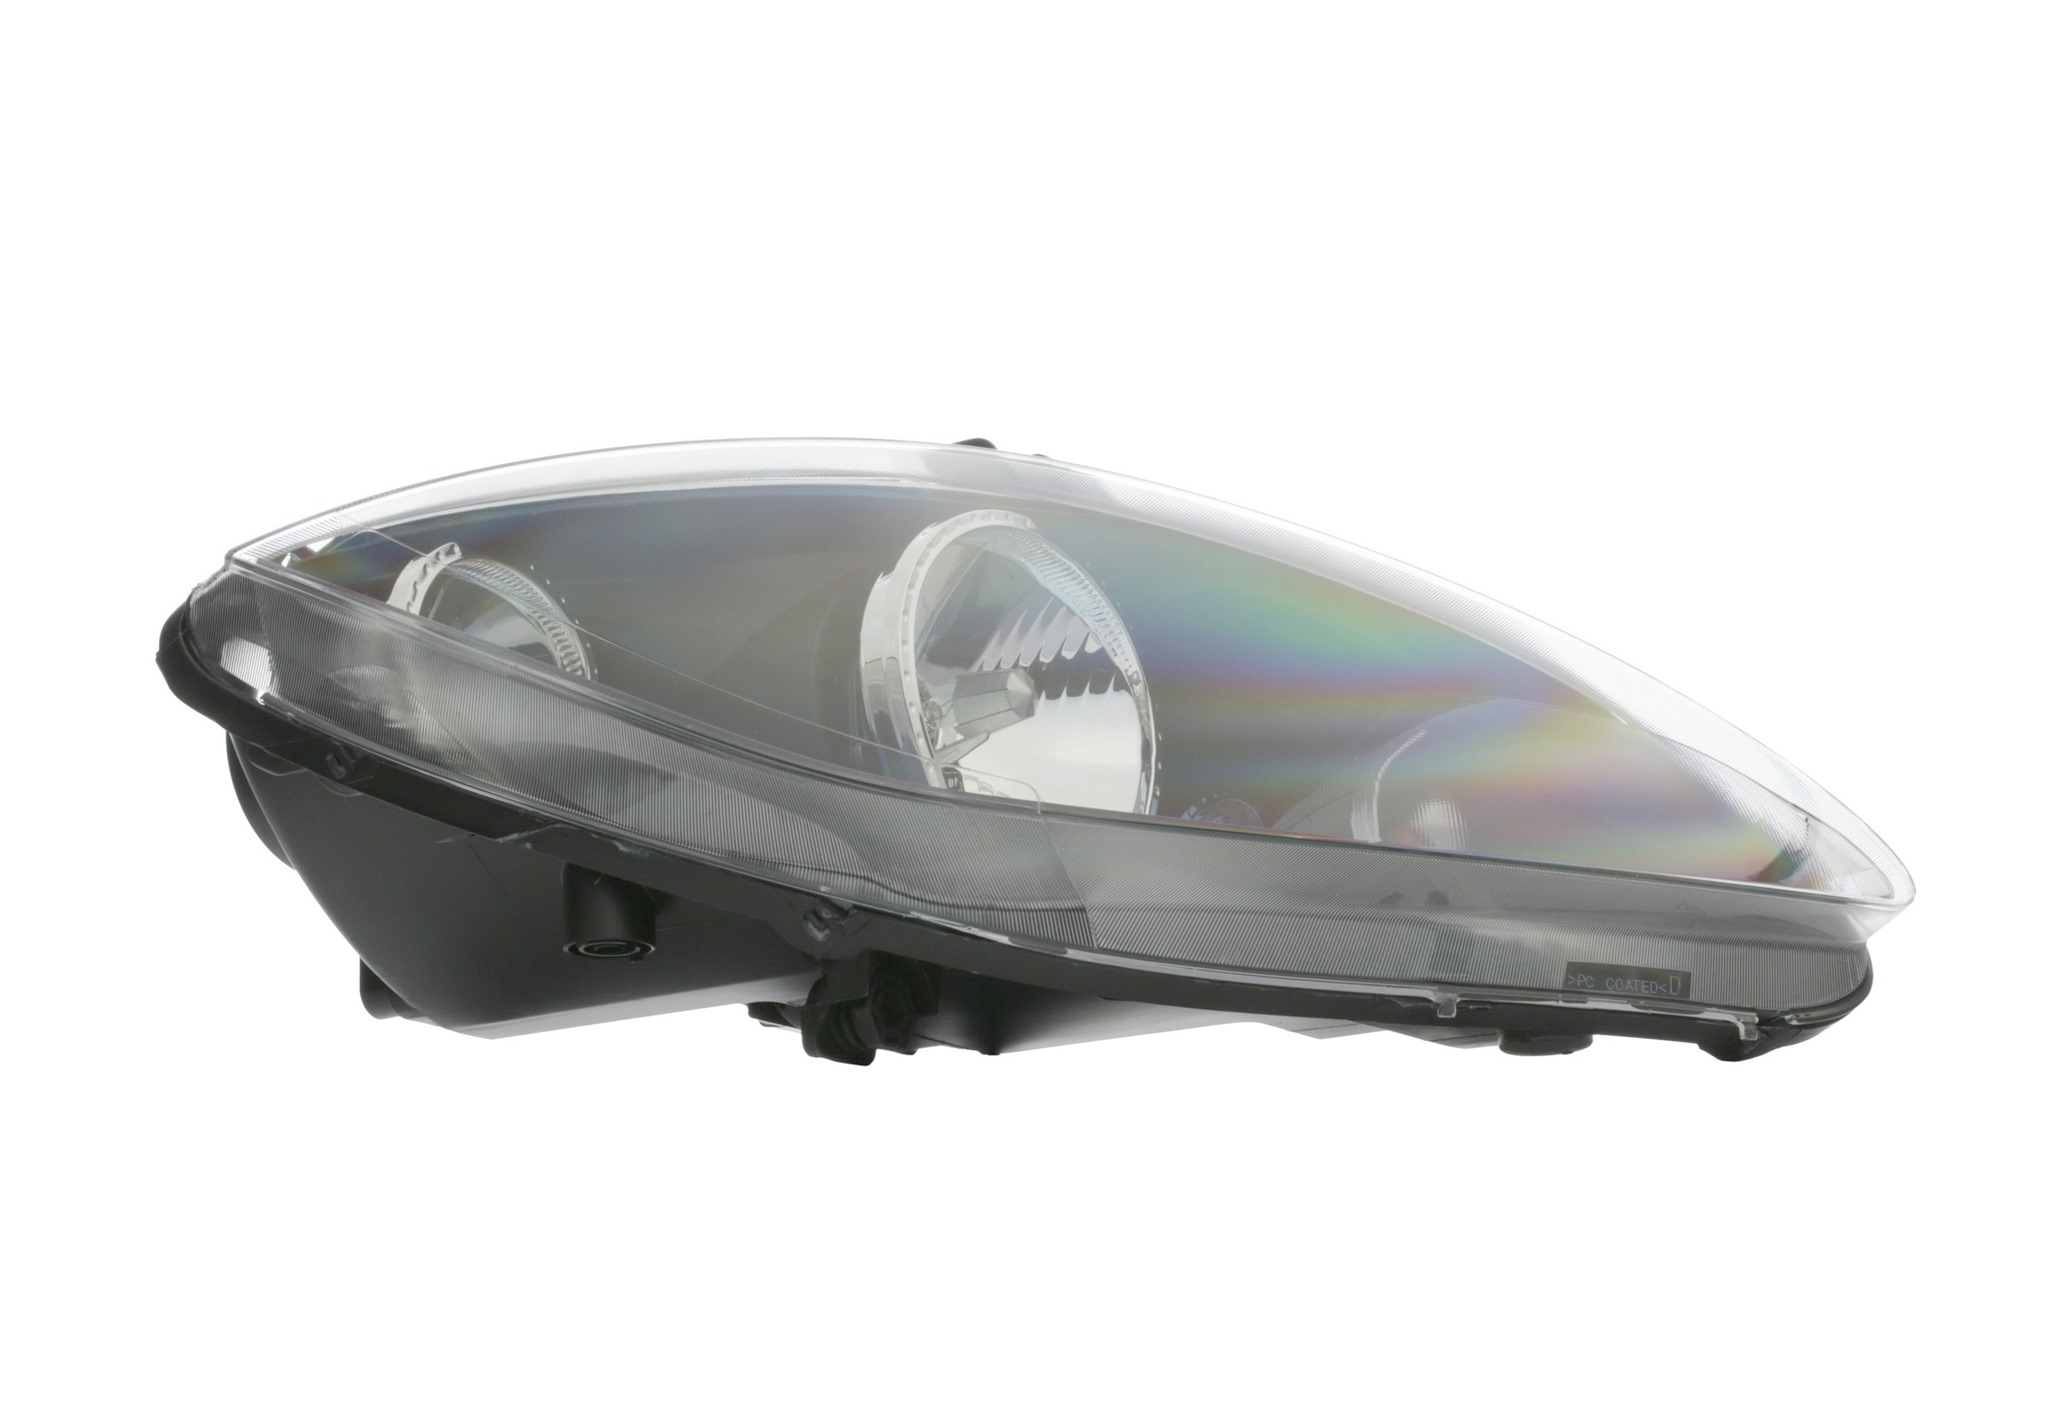 044090 VALEO Headlight ROVER Right, H7, H1, W5W, PY21W, Halogen, transparent, with low beam, for right-hand traffic, ORIGINAL PART, with bulb for low beam, with bulb for high beam, with motor for headlamp levelling